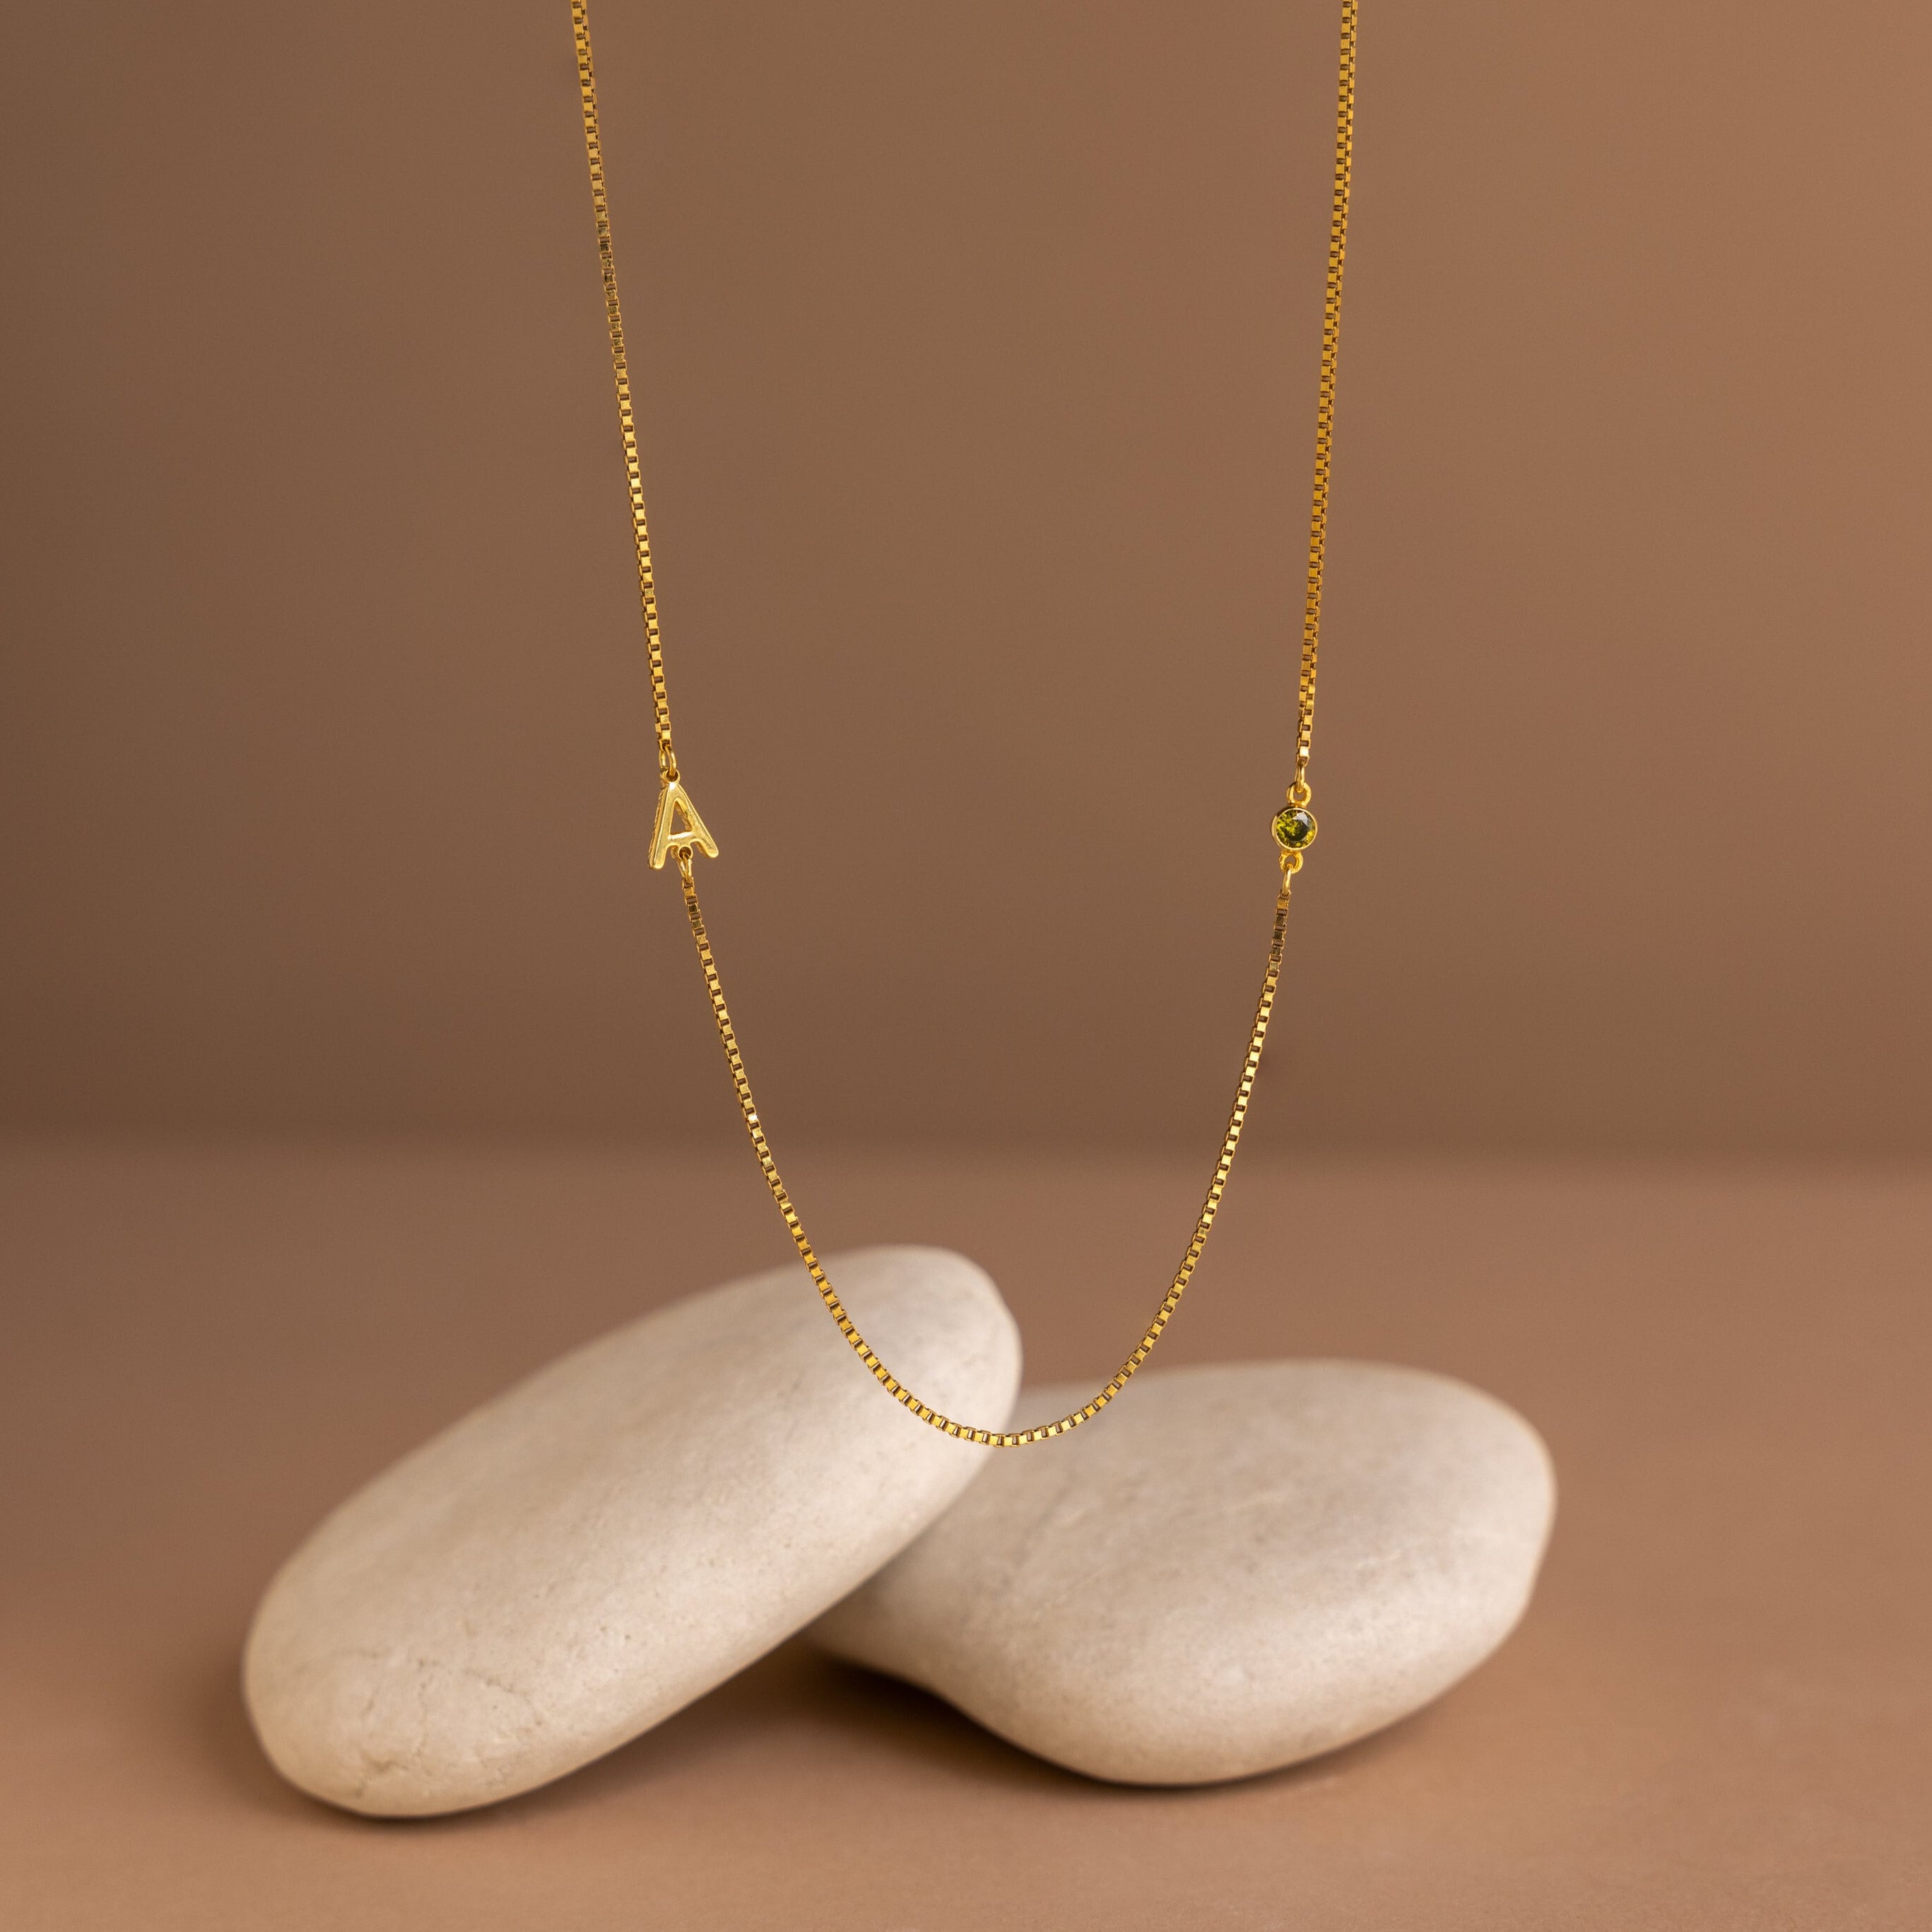 050 Gauge Solid Box Chain Necklace in 10K Solid Gold - 22